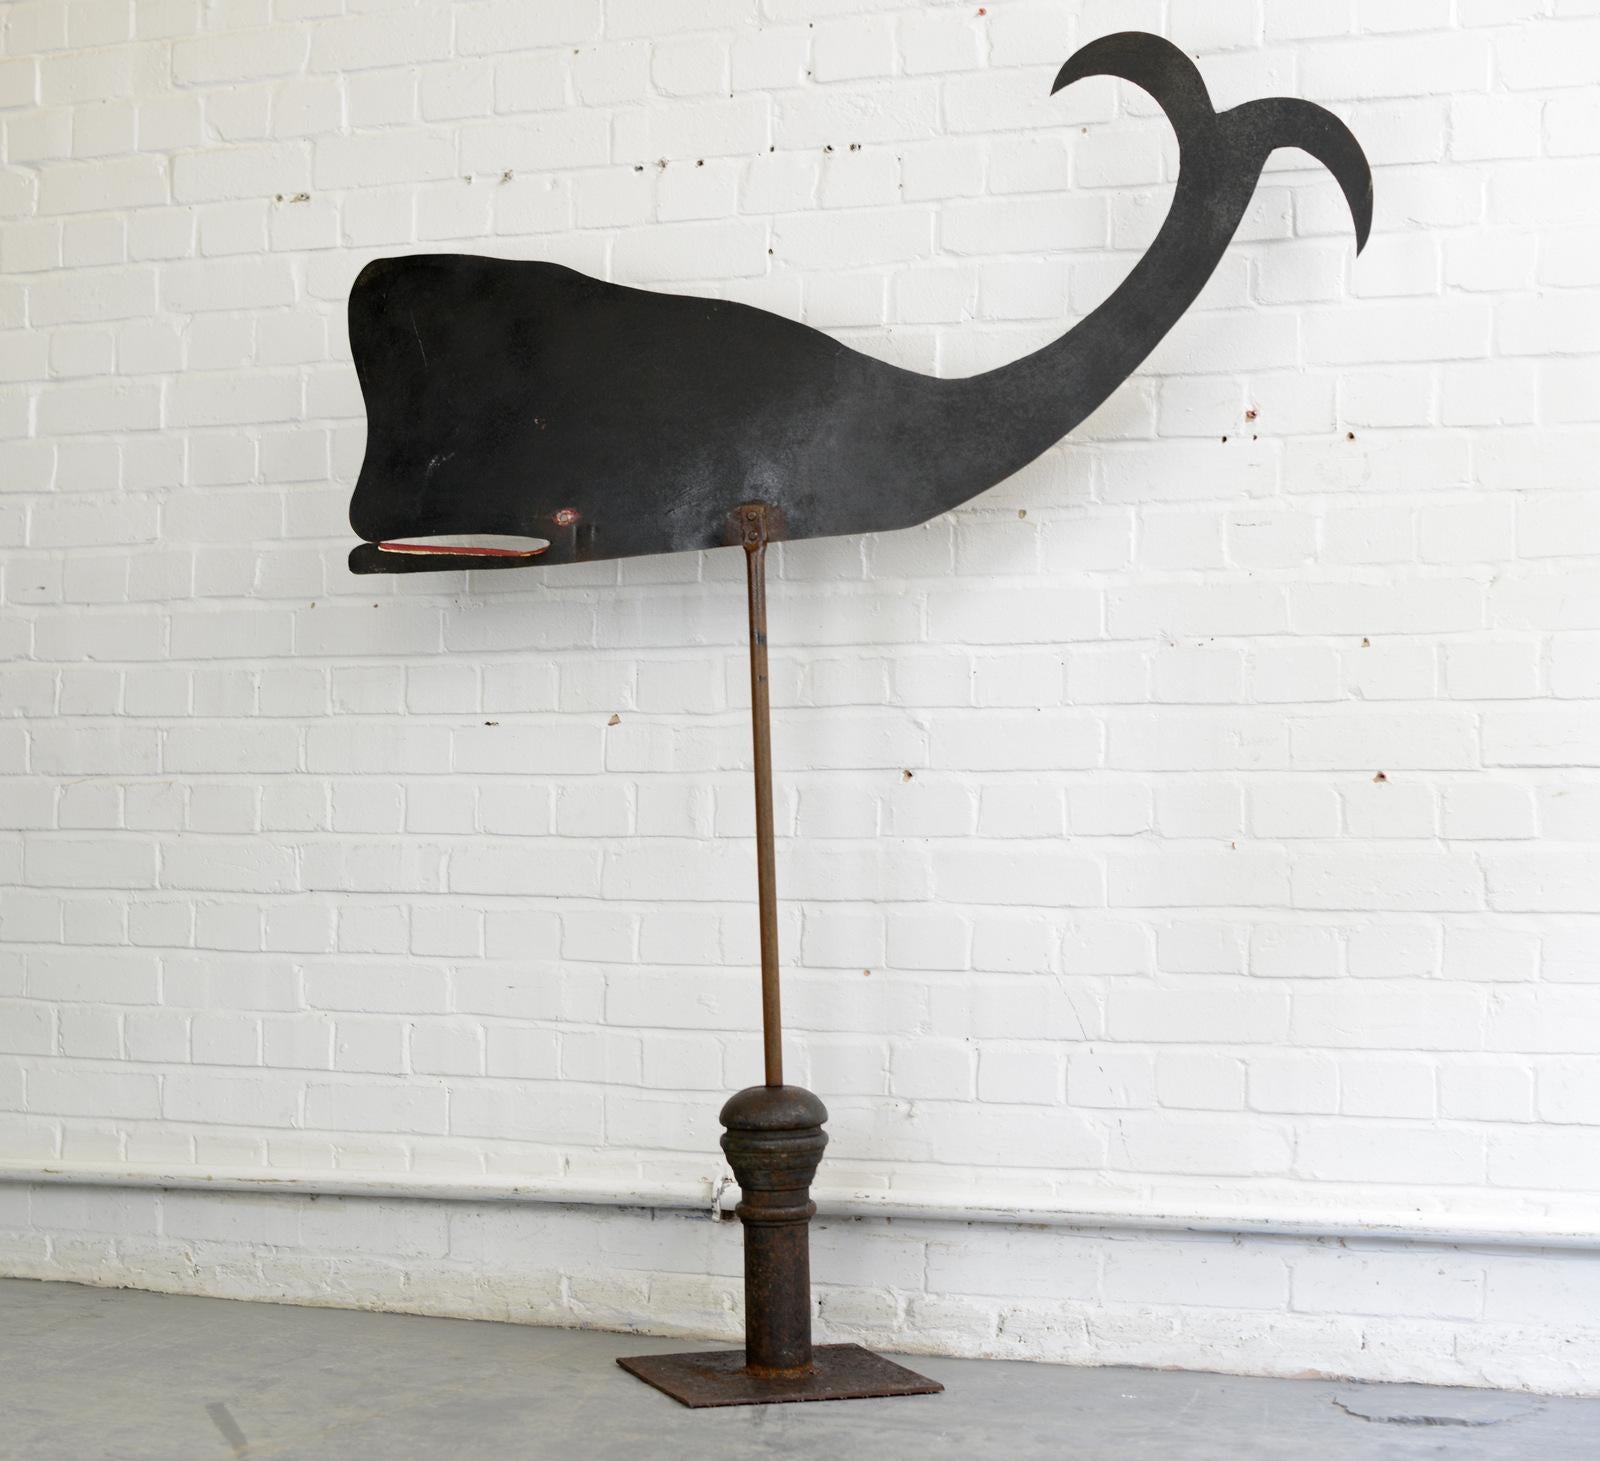 Folk Art Whale Weathervane, circa 1950s.

- Made from sheet steel and hand painted
- Heavy cast iron base
- Salvaged from a building in Portsmouth docks
- English, 1950s
- Measures: 157 cm tall x 129 cm wide.

Condition report:

The piece